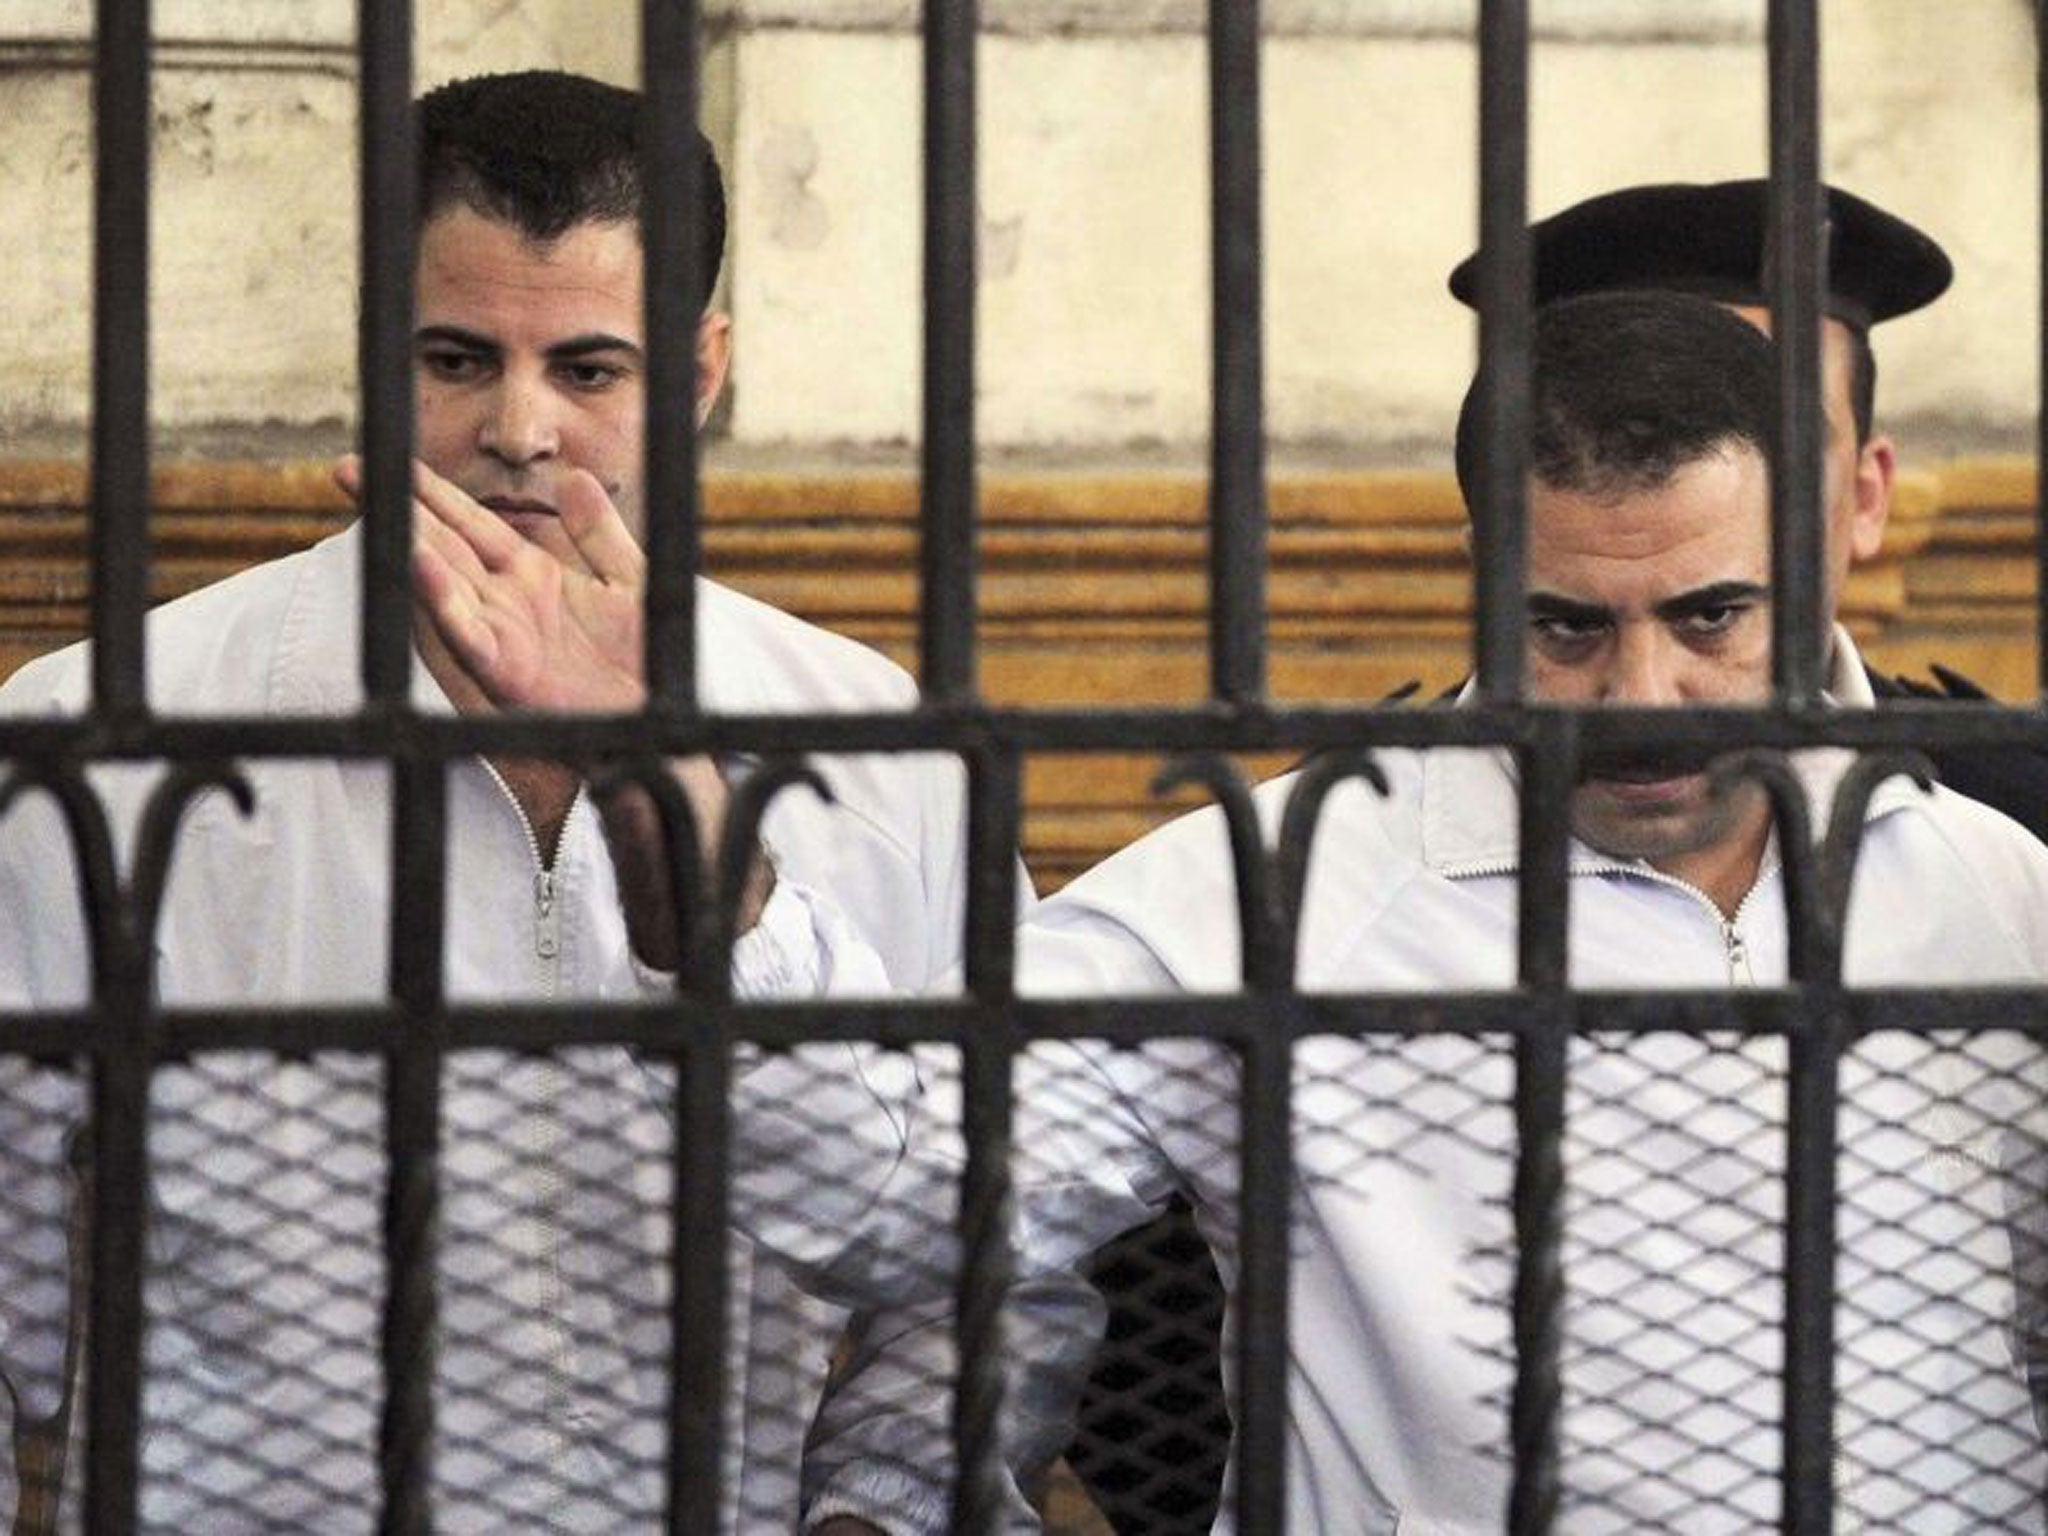 Egyptian policemen Awad Suleiman (right) and Mahmoud Salah were sentenced to 10 years in prison on Monday for torturing an activist to death in 2010